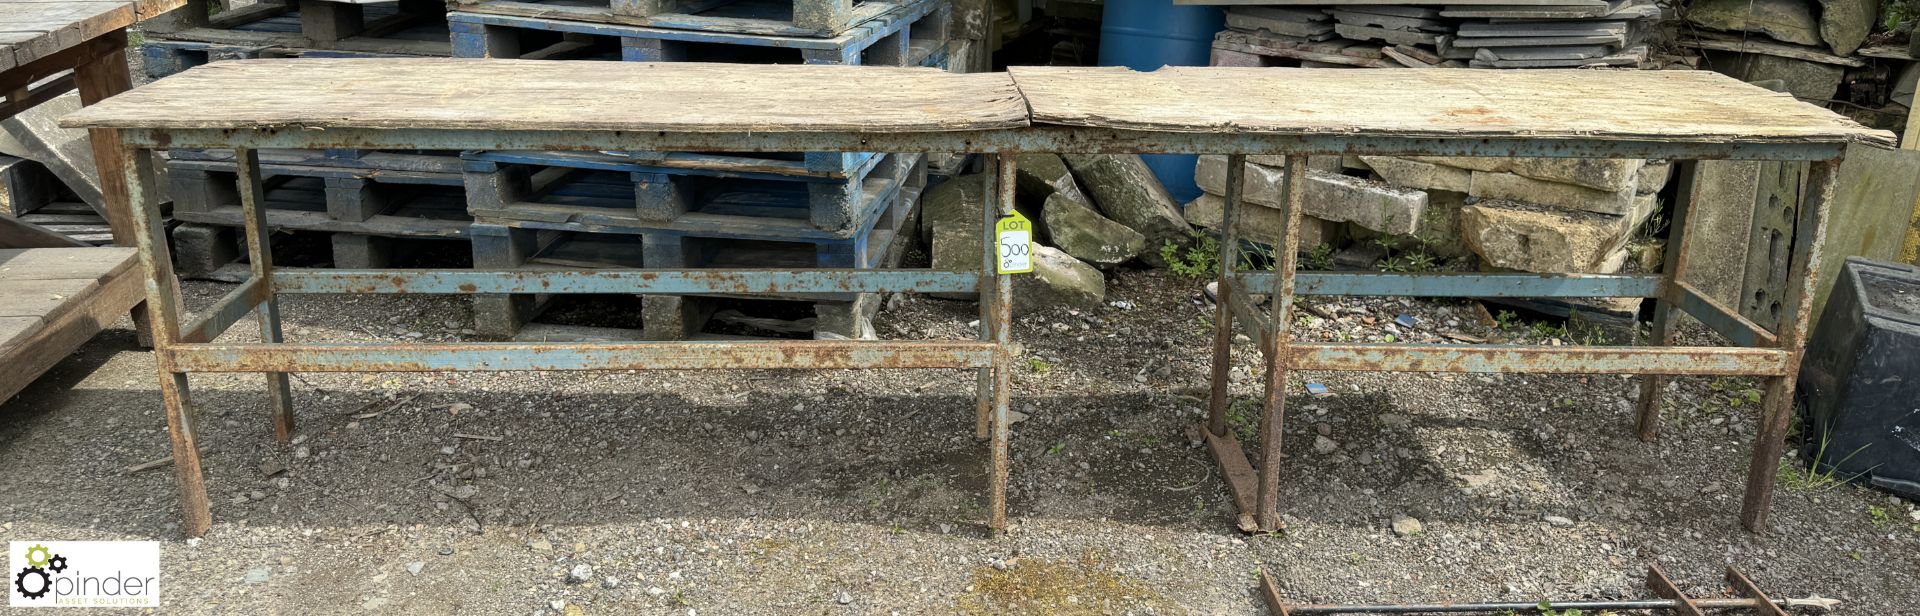 A reclaimed metal and wooden Workbench, approx. 34in x 24in x 126in